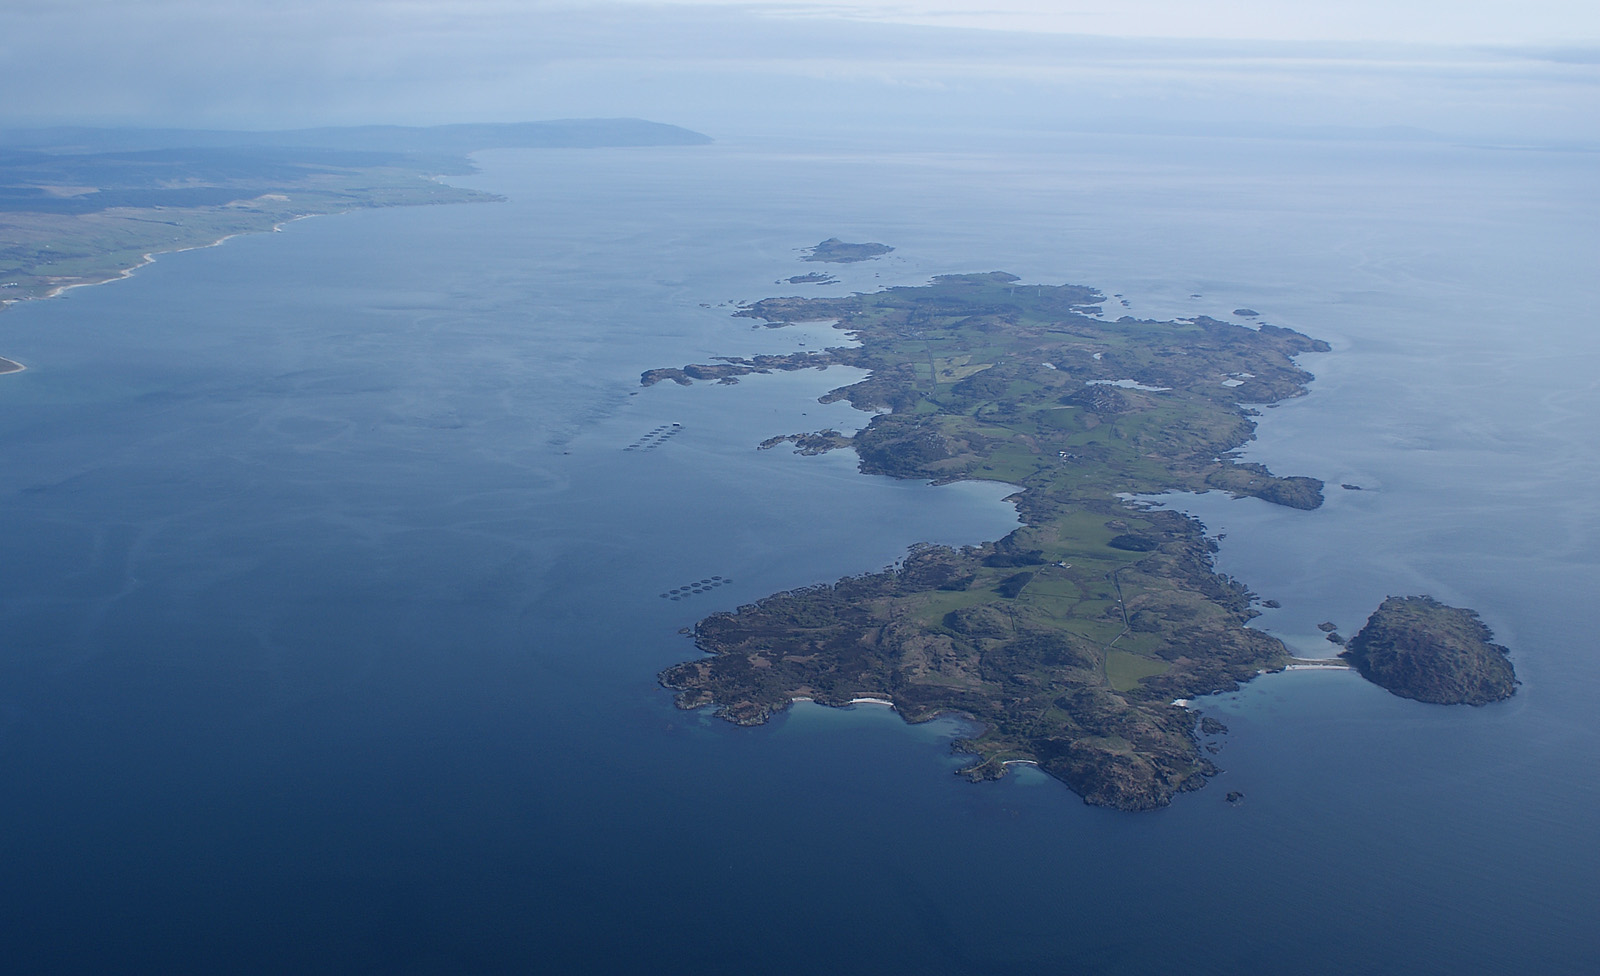 Gigha from the air